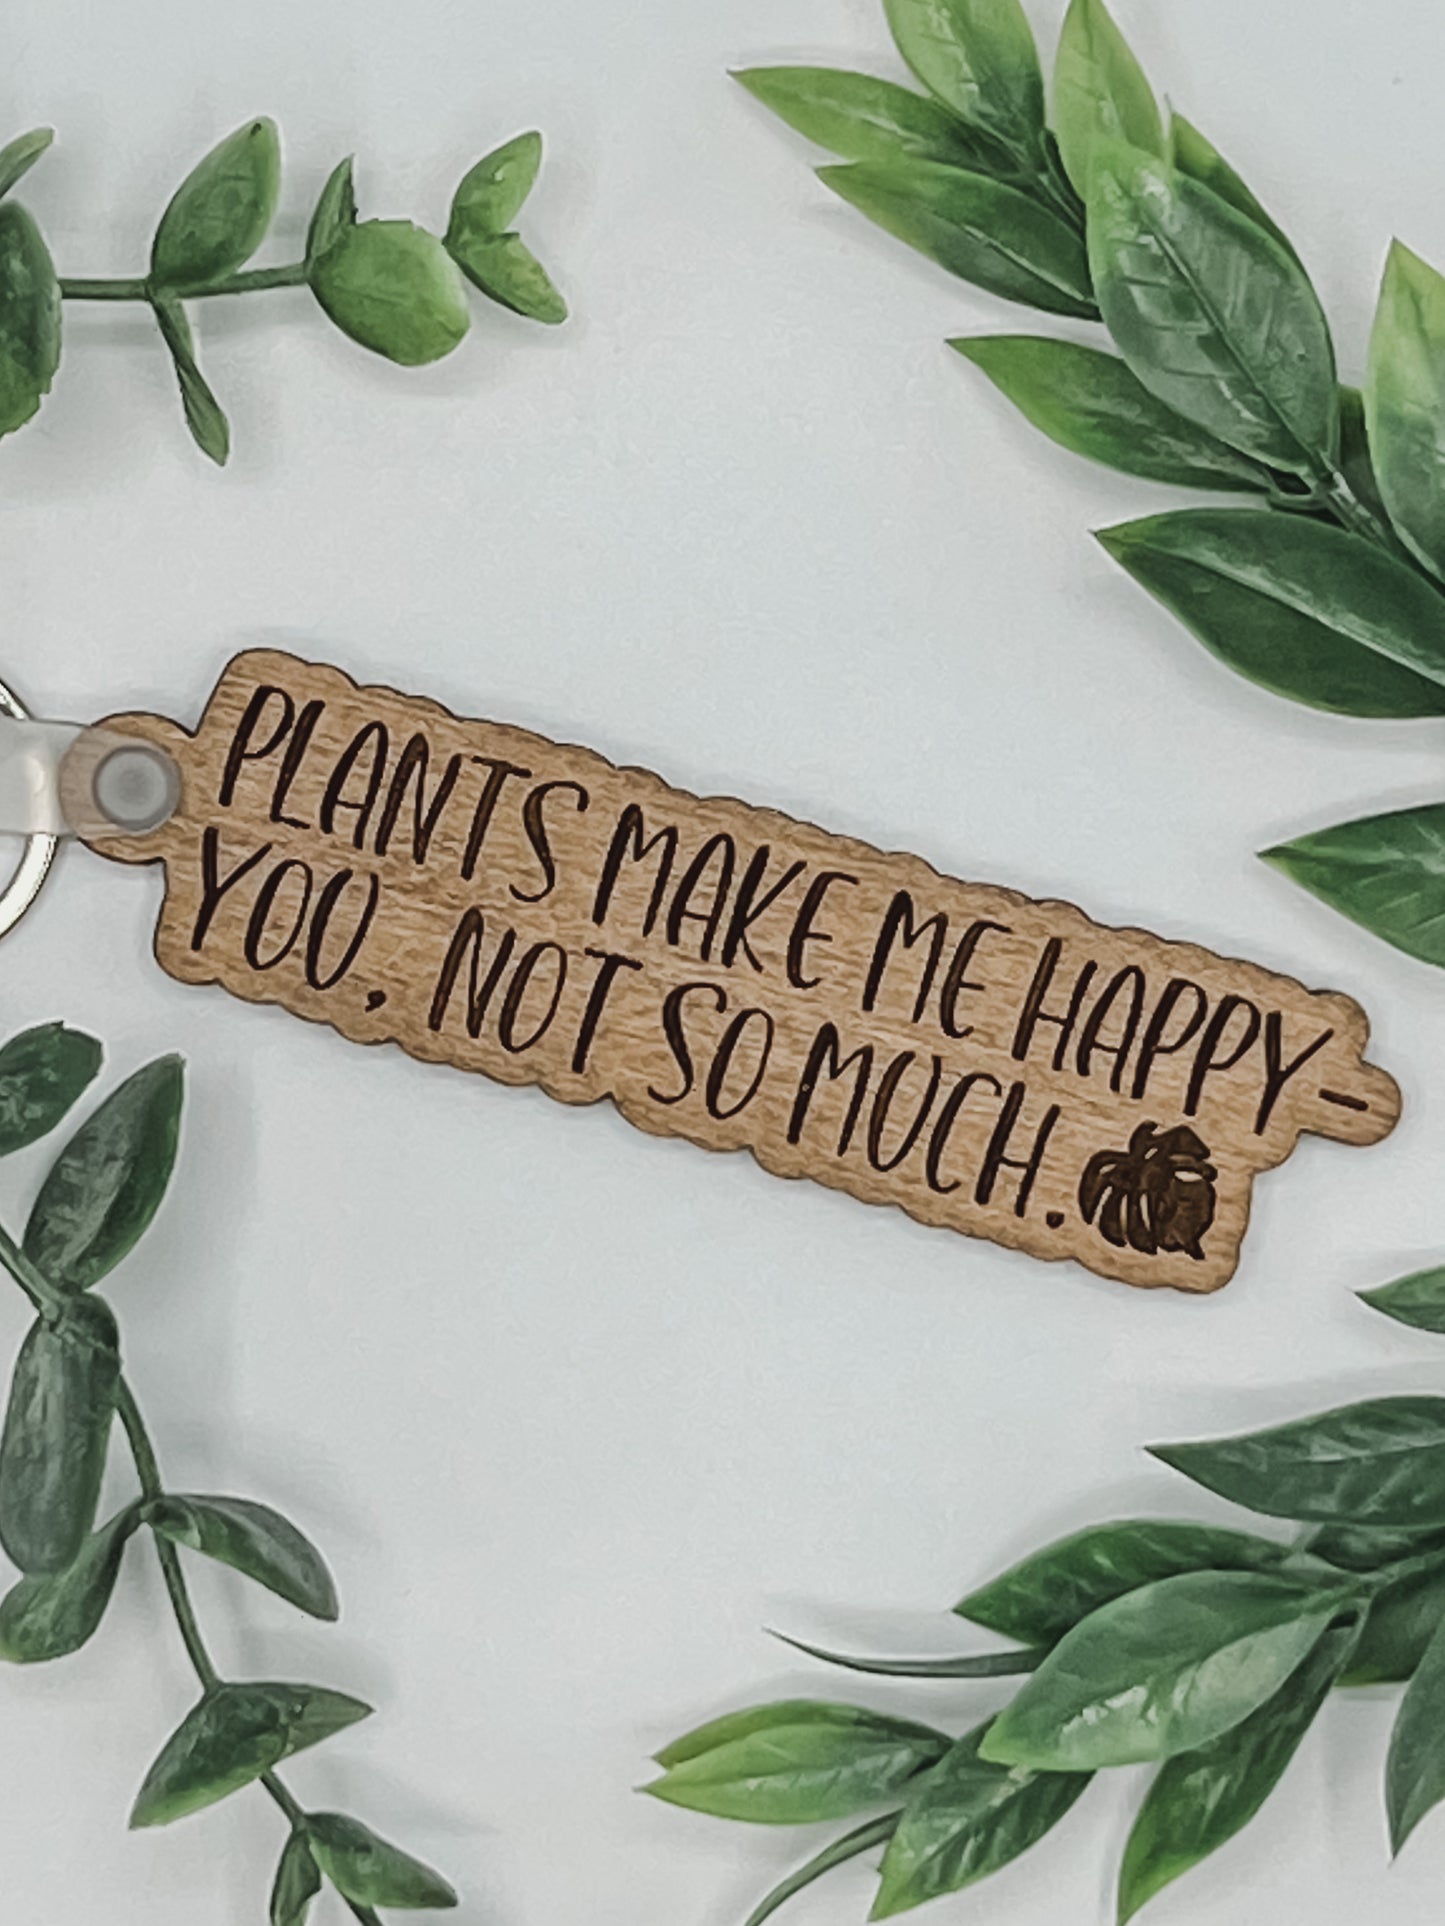 Plants make me happy - you, not so much